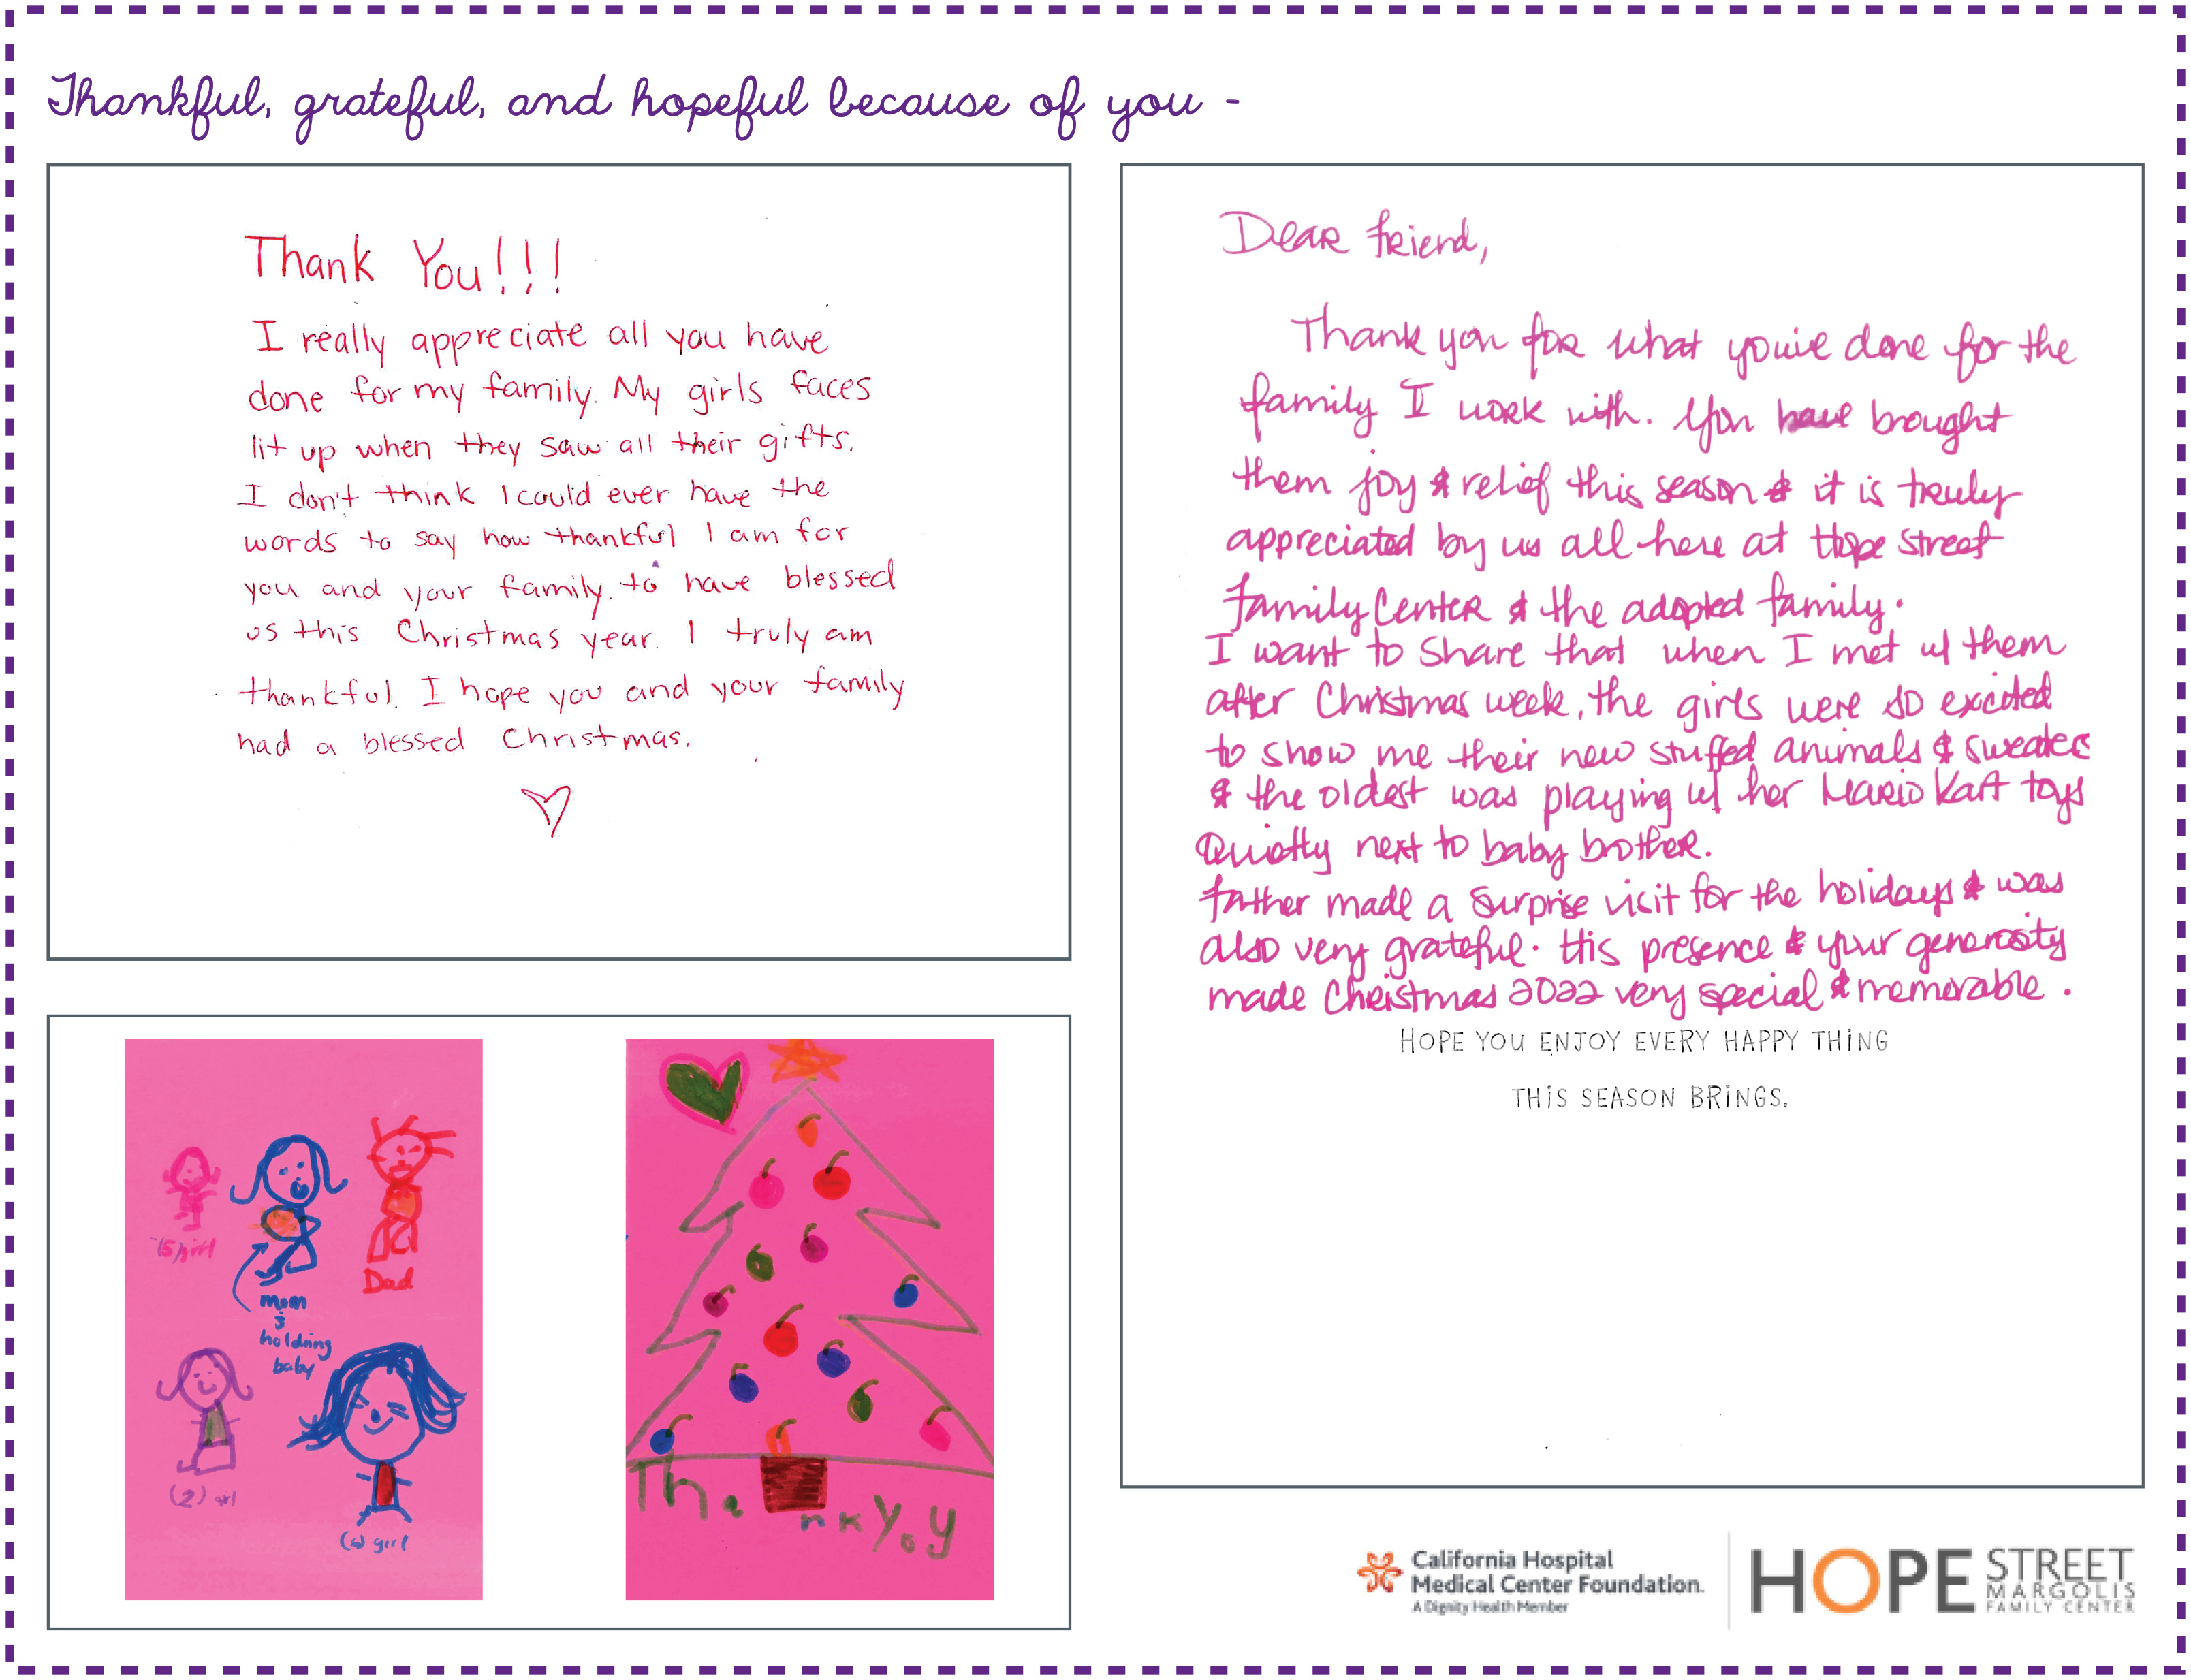 Thank you notes from a family who benefitted from Celebrate a Family for Hope for the Holidays